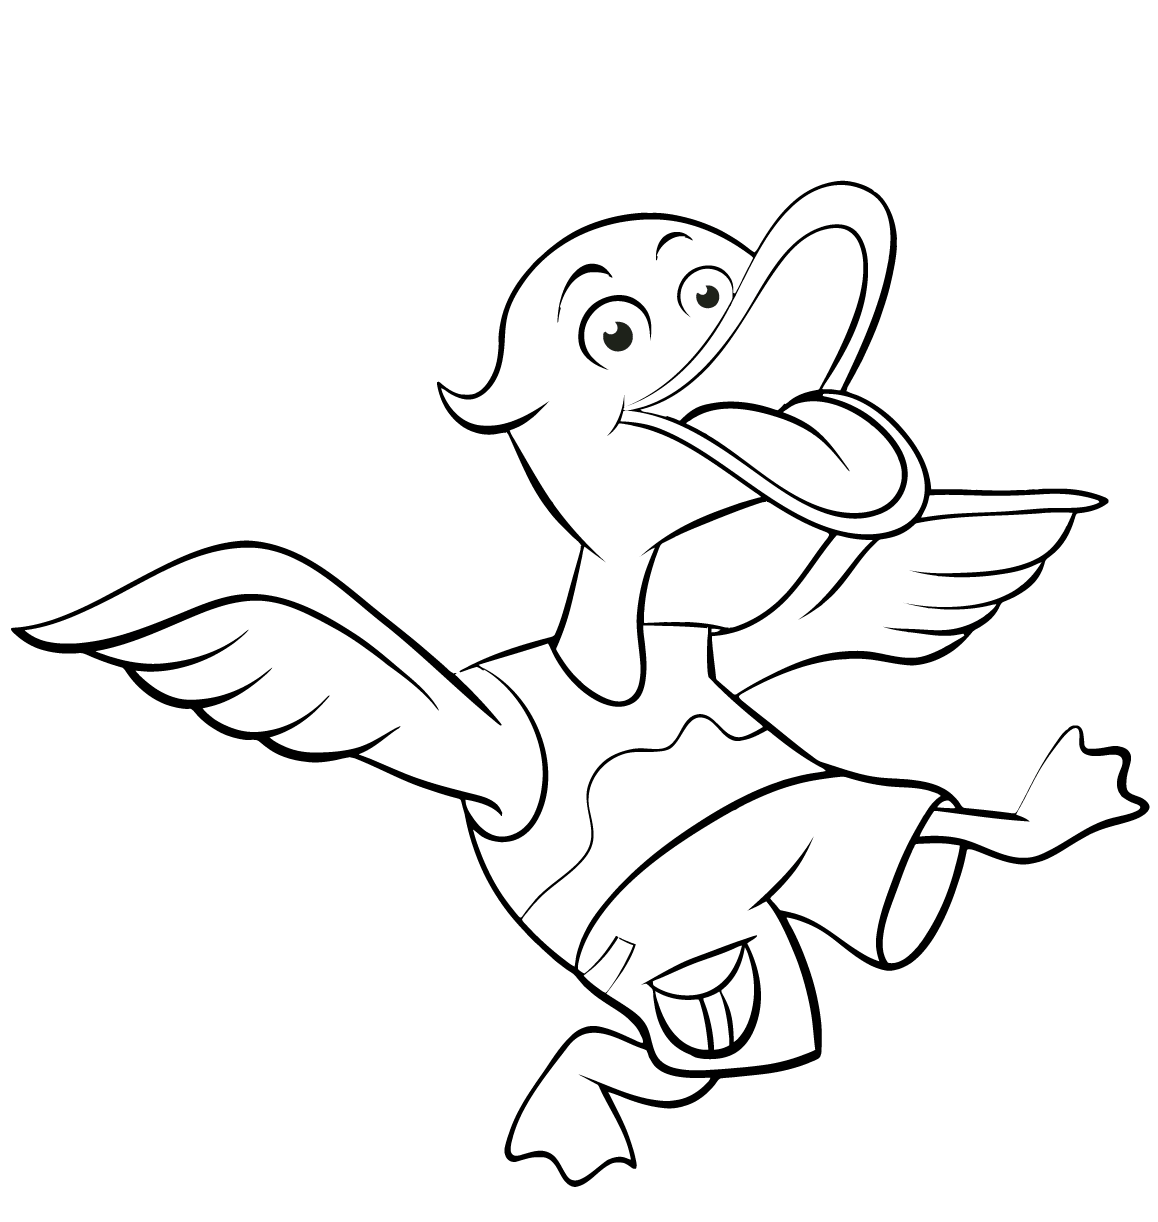 Funny Cartoon Duck Coloring Pages